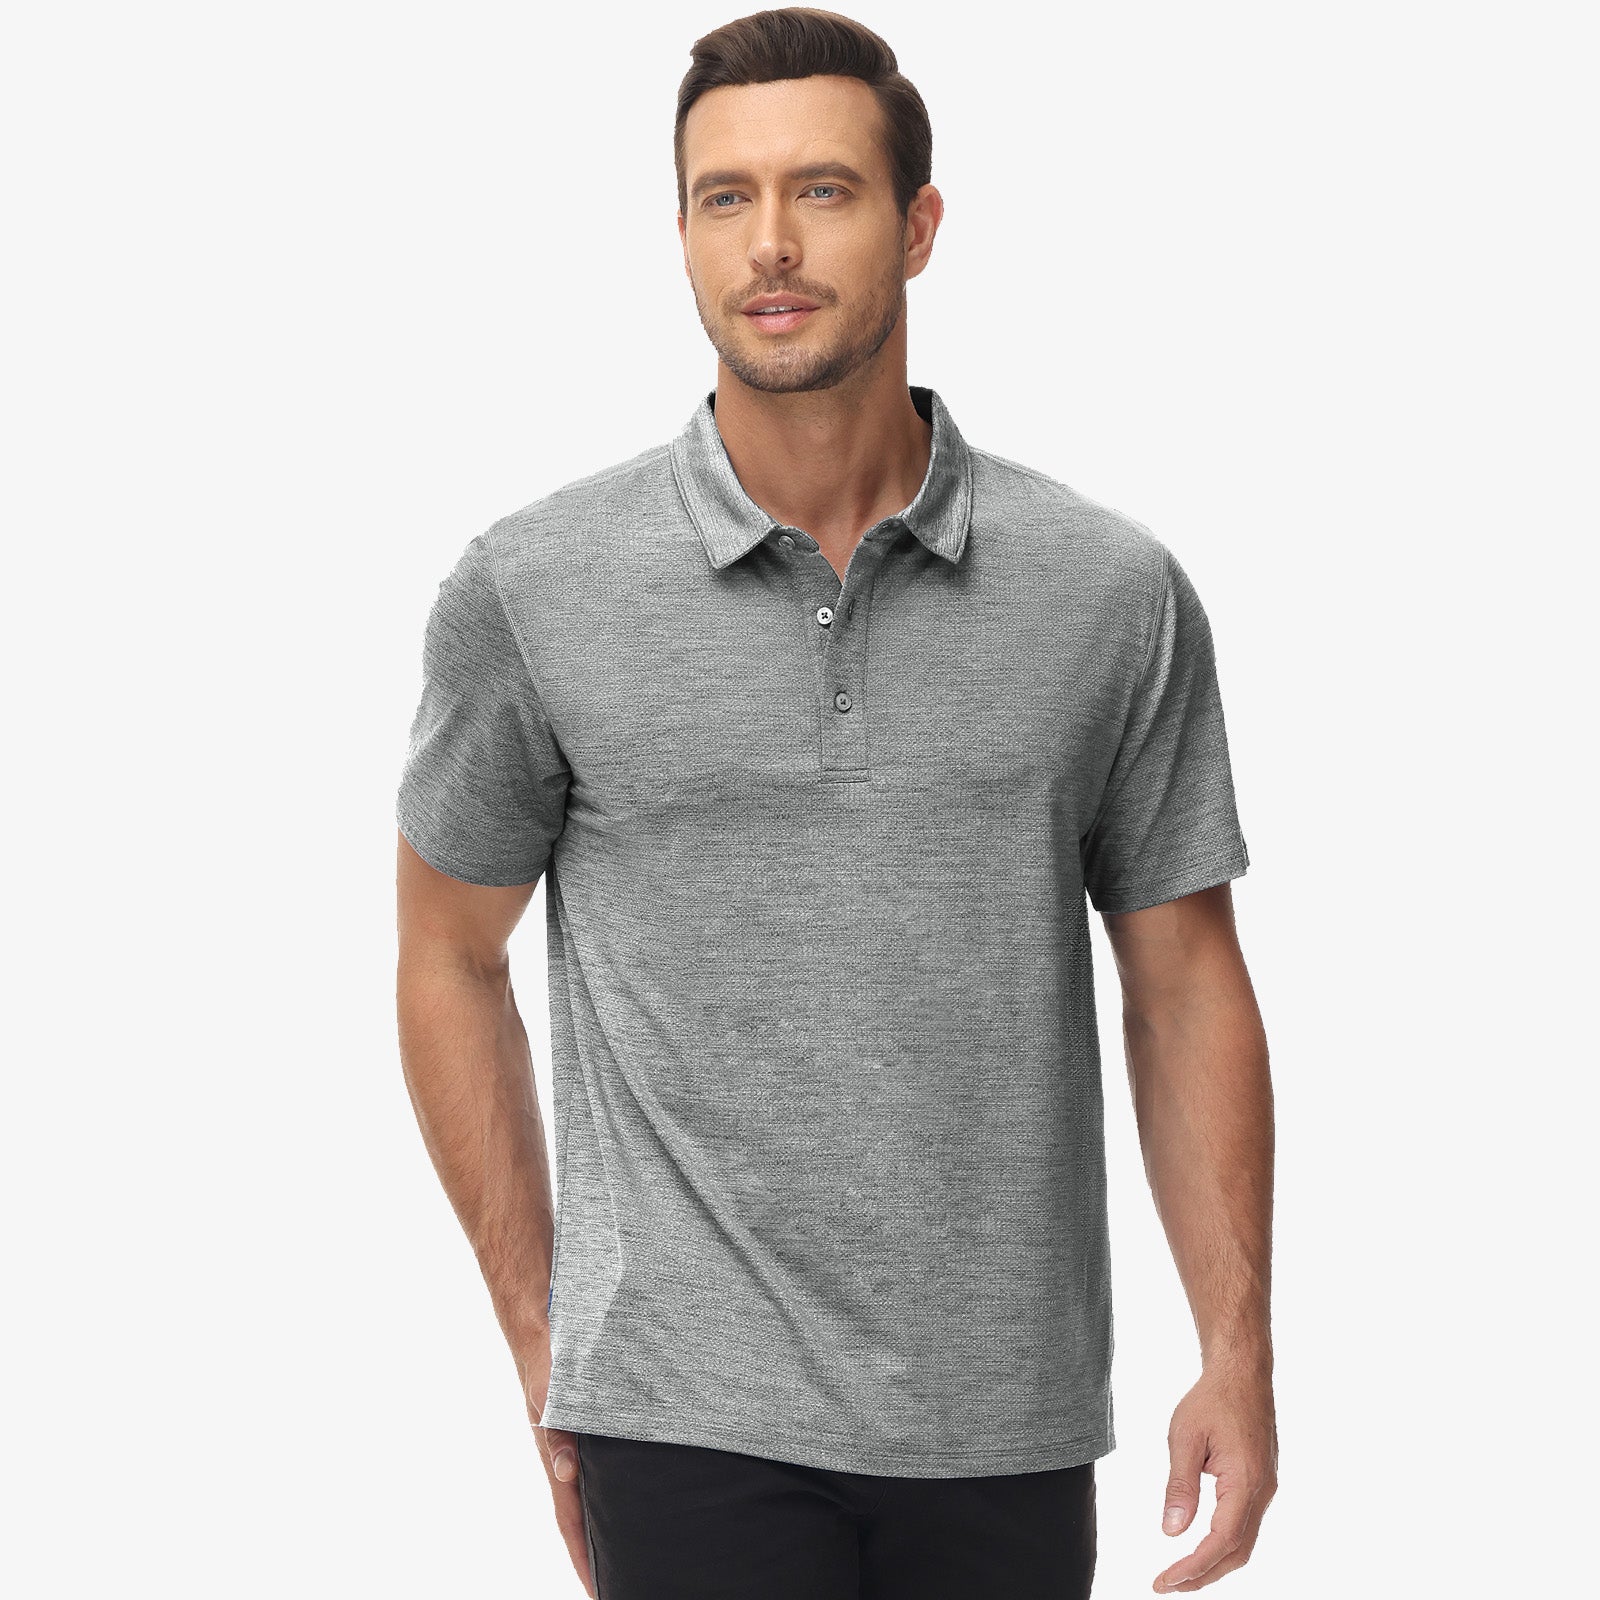 Men's Golf Dry Fit Polo Shirts Athletic Collared Shirt